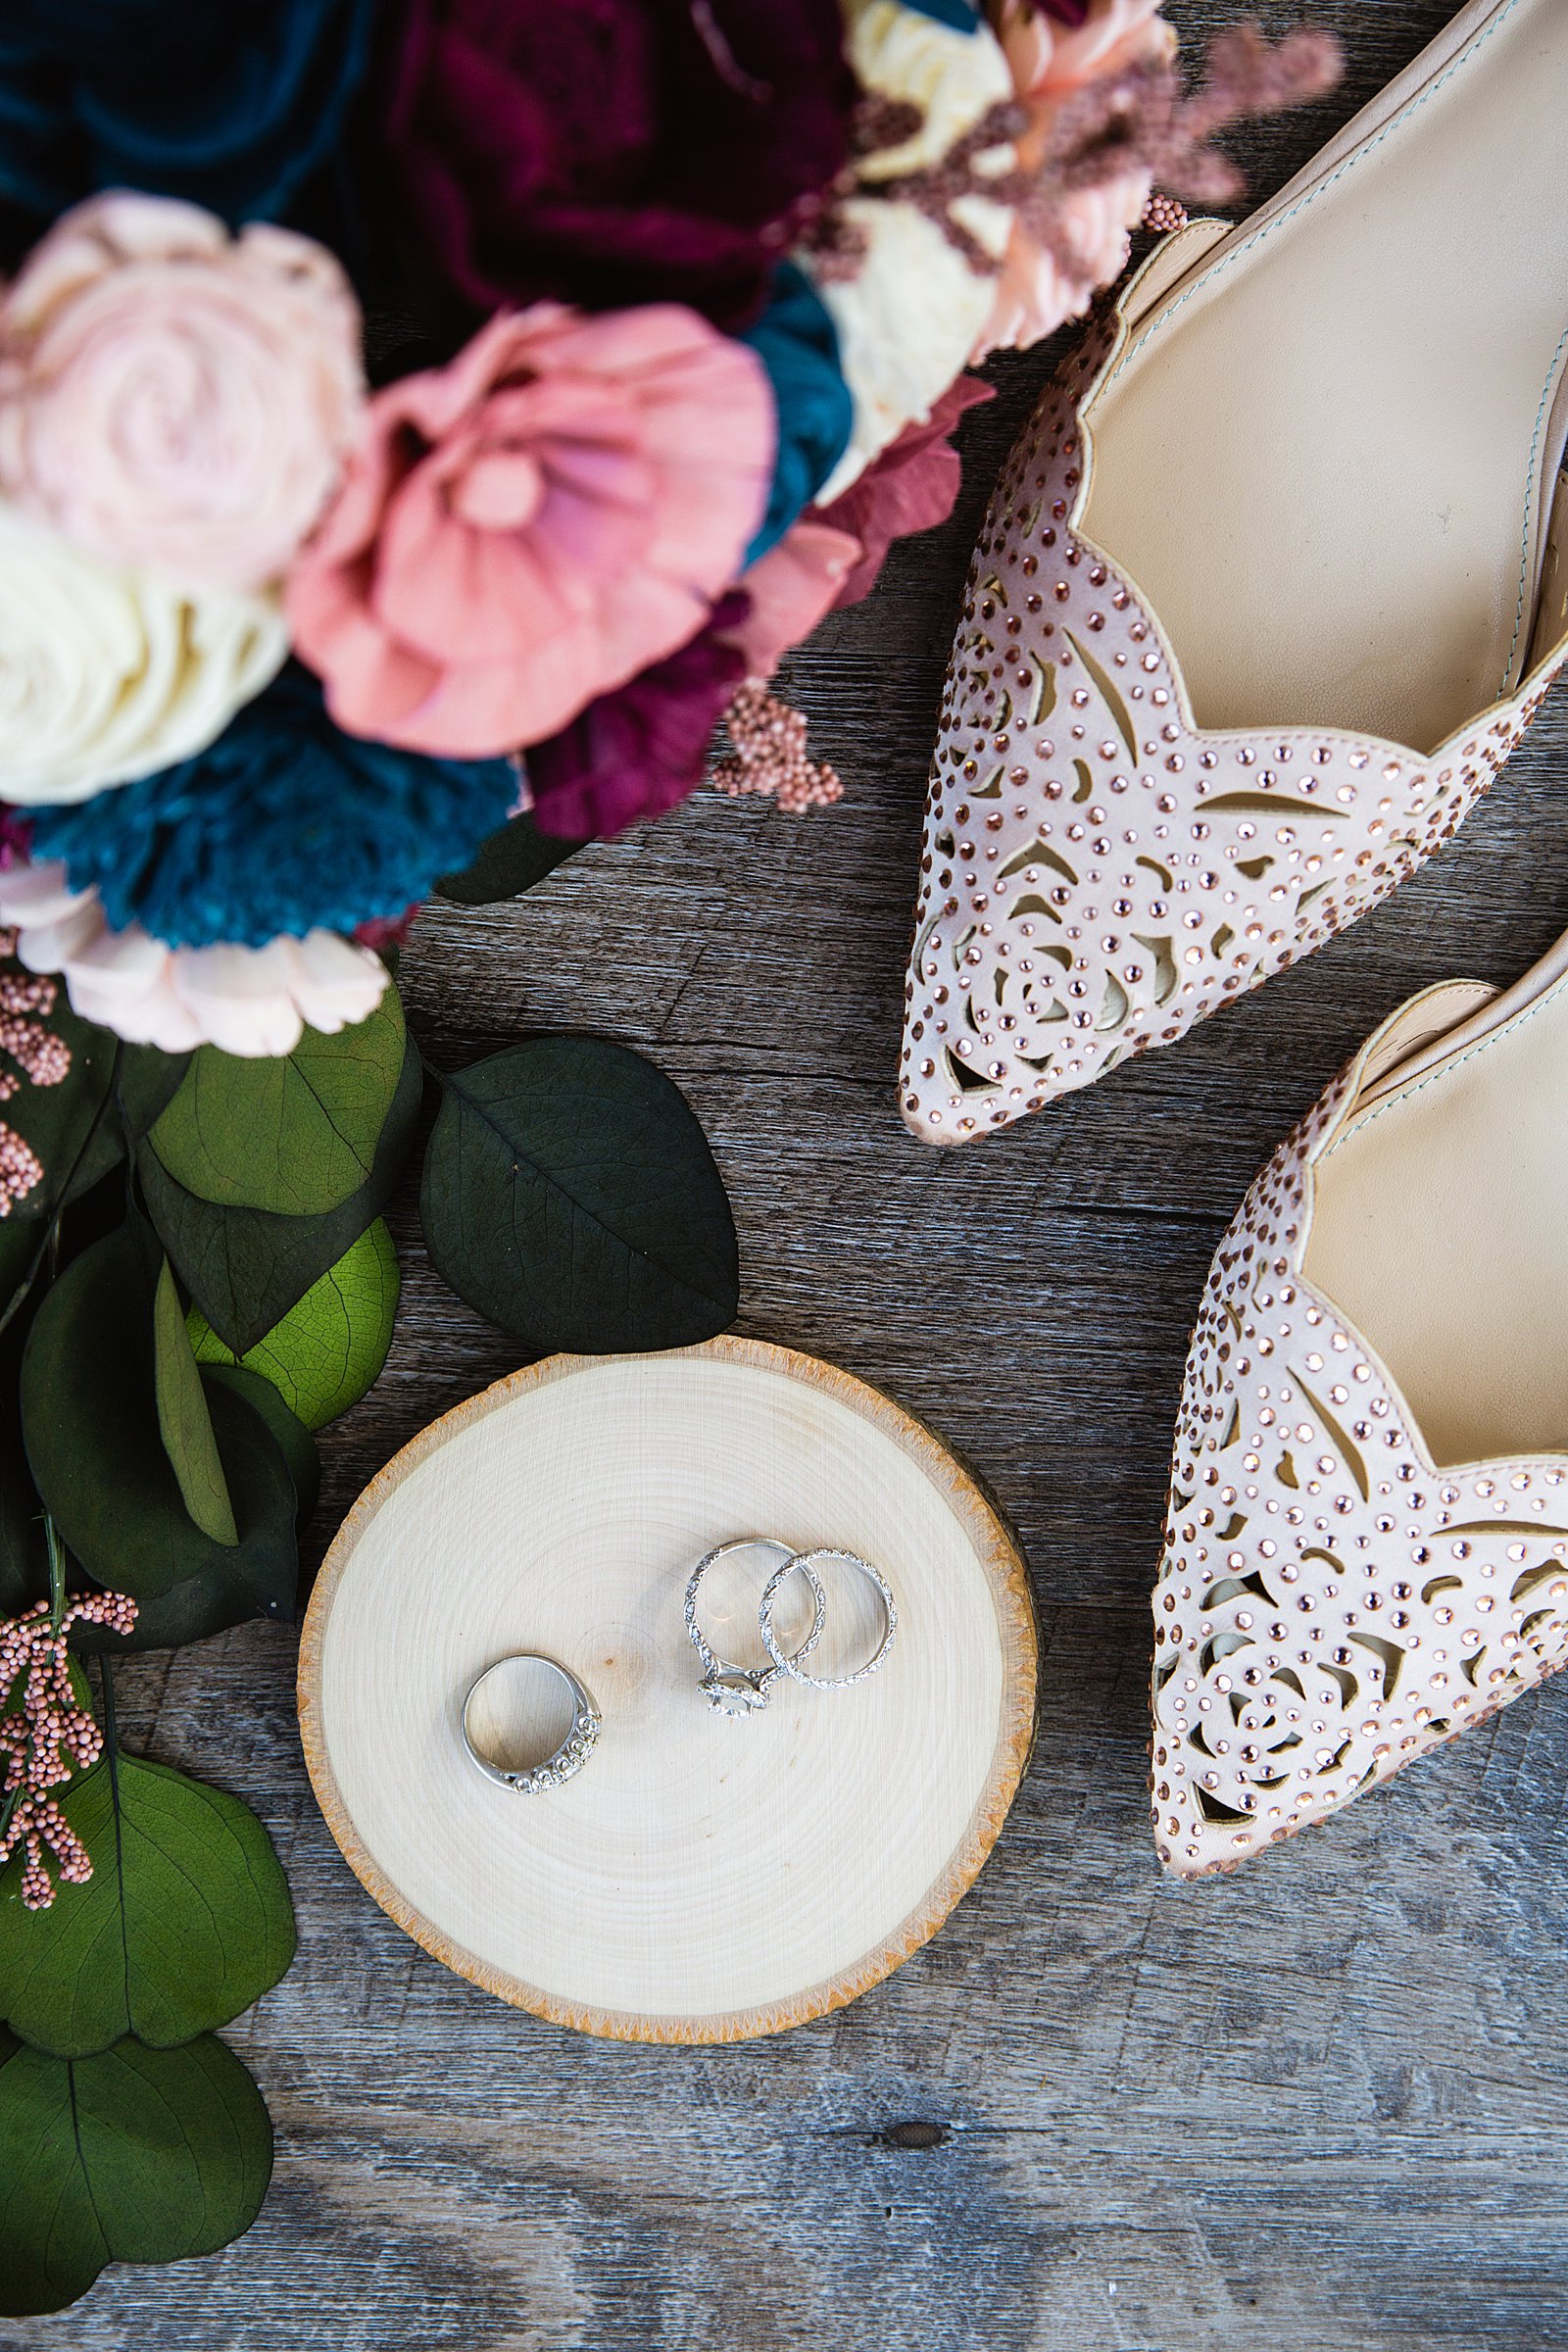 Bride's wedding day details of blush shoes, rings, and colorful wooden flower bouquet by PMA Photography.